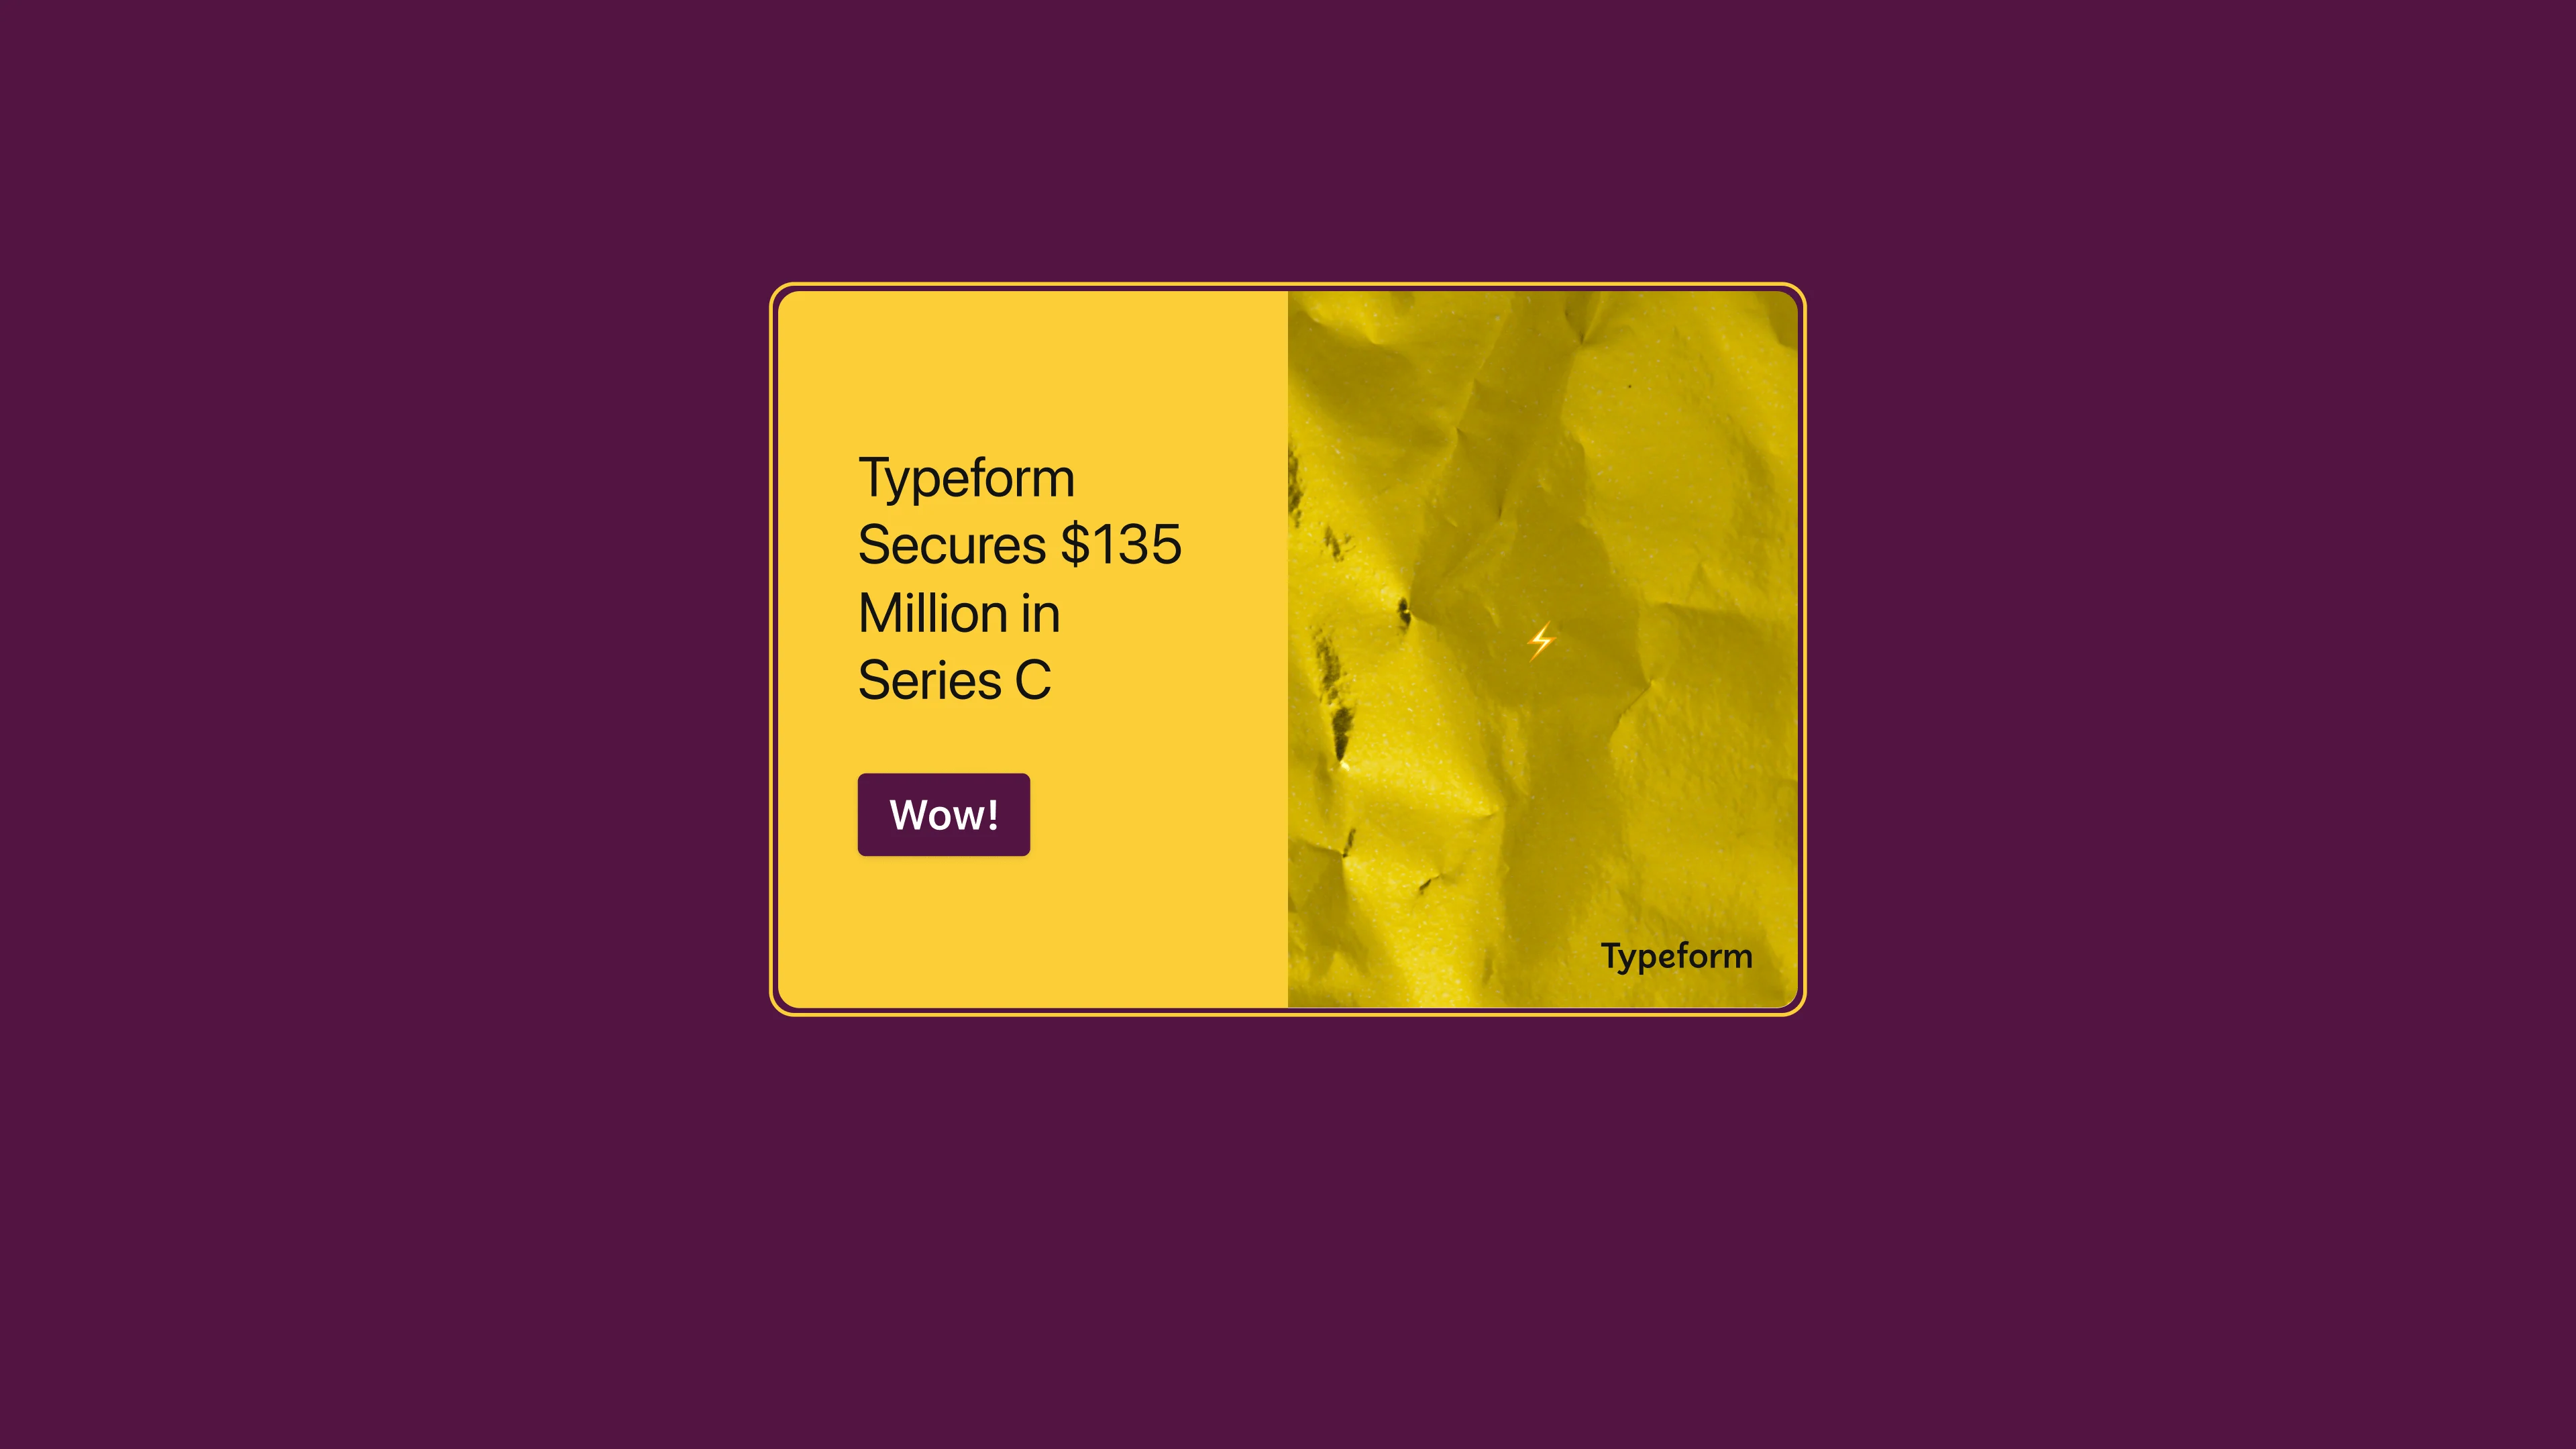 Typeform Secures 135 Million in Series C Funding Led by Sofina